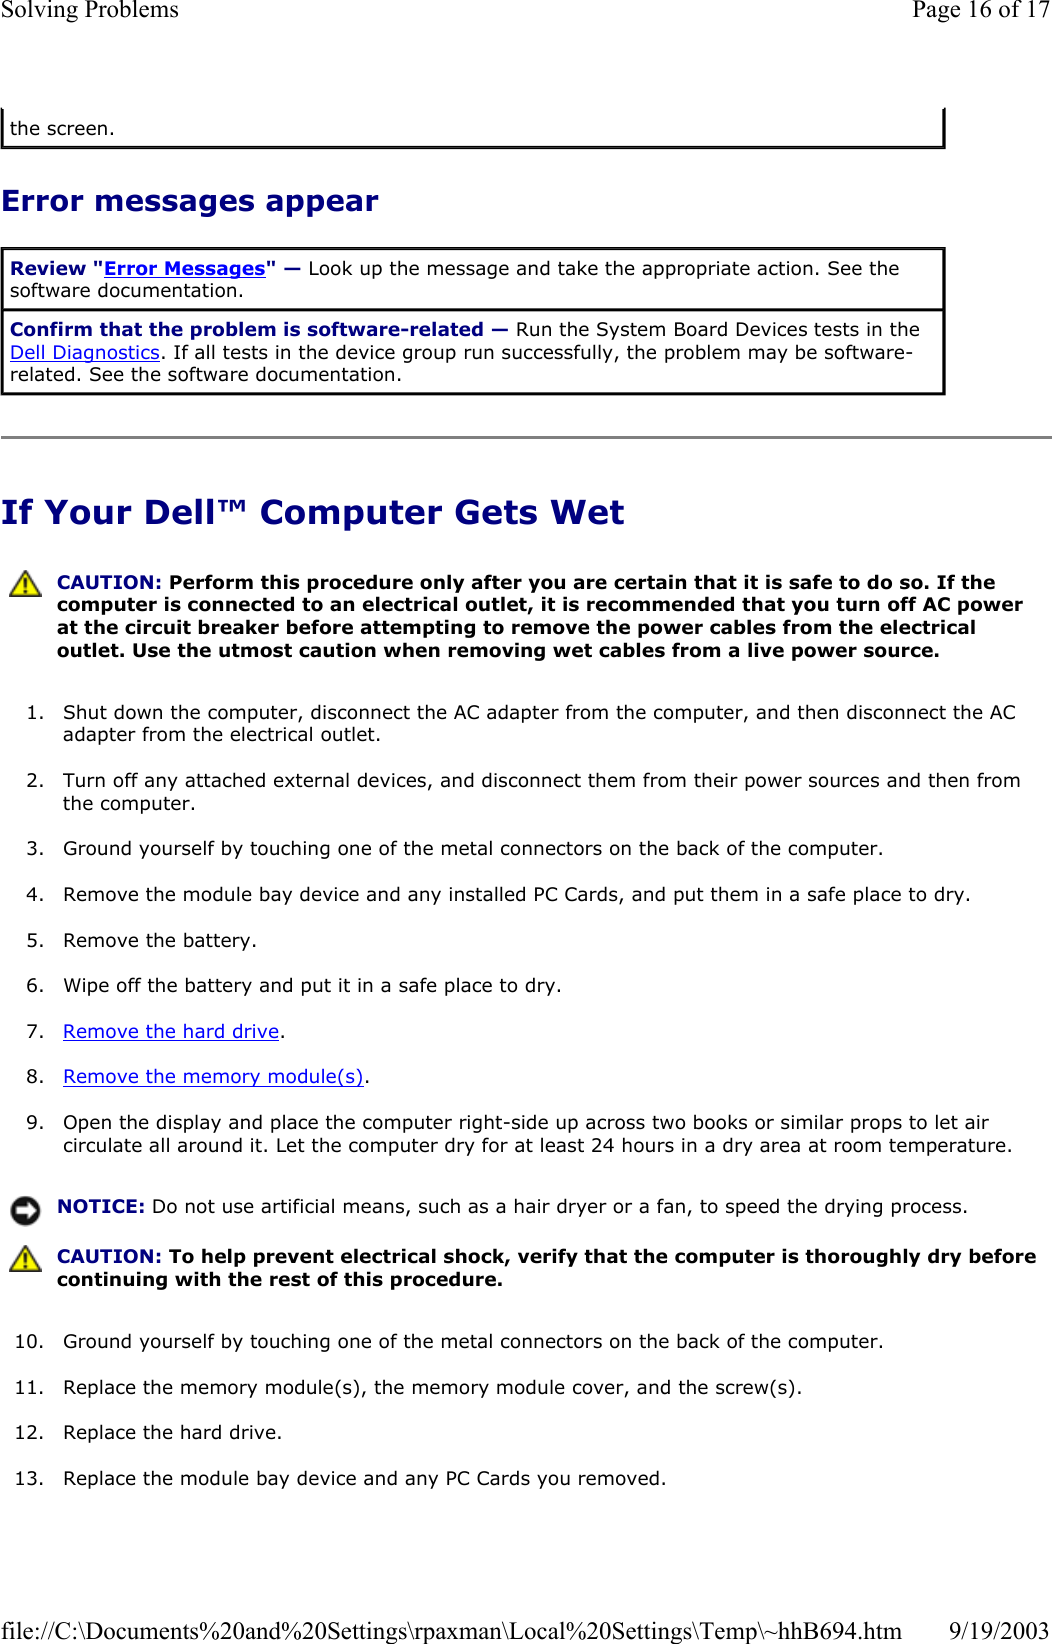 Error messages appear If Your Dell™ Computer Gets Wet 1. Shut down the computer, disconnect the AC adapter from the computer, and then disconnect the AC adapter from the electrical outlet.  2. Turn off any attached external devices, and disconnect them from their power sources and then from the computer.  3. Ground yourself by touching one of the metal connectors on the back of the computer.  4. Remove the module bay device and any installed PC Cards, and put them in a safe place to dry.  5. Remove the battery.  6. Wipe off the battery and put it in a safe place to dry.  7. Remove the hard drive.  8. Remove the memory module(s).  9. Open the display and place the computer right-side up across two books or similar props to let air circulate all around it. Let the computer dry for at least 24 hours in a dry area at room temperature.  10. Ground yourself by touching one of the metal connectors on the back of the computer.  11. Replace the memory module(s), the memory module cover, and the screw(s).  12. Replace the hard drive.  13. Replace the module bay device and any PC Cards you removed.  the screen. Review &quot;Error Messages&quot; — Look up the message and take the appropriate action. See the software documentation. Confirm that the problem is software-related — Run the System Board Devices tests in the Dell Diagnostics. If all tests in the device group run successfully, the problem may be software-related. See the software documentation.  CAUTION: Perform this procedure only after you are certain that it is safe to do so. If the computer is connected to an electrical outlet, it is recommended that you turn off AC power at the circuit breaker before attempting to remove the power cables from the electrical outlet. Use the utmost caution when removing wet cables from a live power source. NOTICE: Do not use artificial means, such as a hair dryer or a fan, to speed the drying process.  CAUTION: To help prevent electrical shock, verify that the computer is thoroughly dry before continuing with the rest of this procedure. Page 16 of 17Solving Problems9/19/2003file://C:\Documents%20and%20Settings\rpaxman\Local%20Settings\Temp\~hhB694.htm